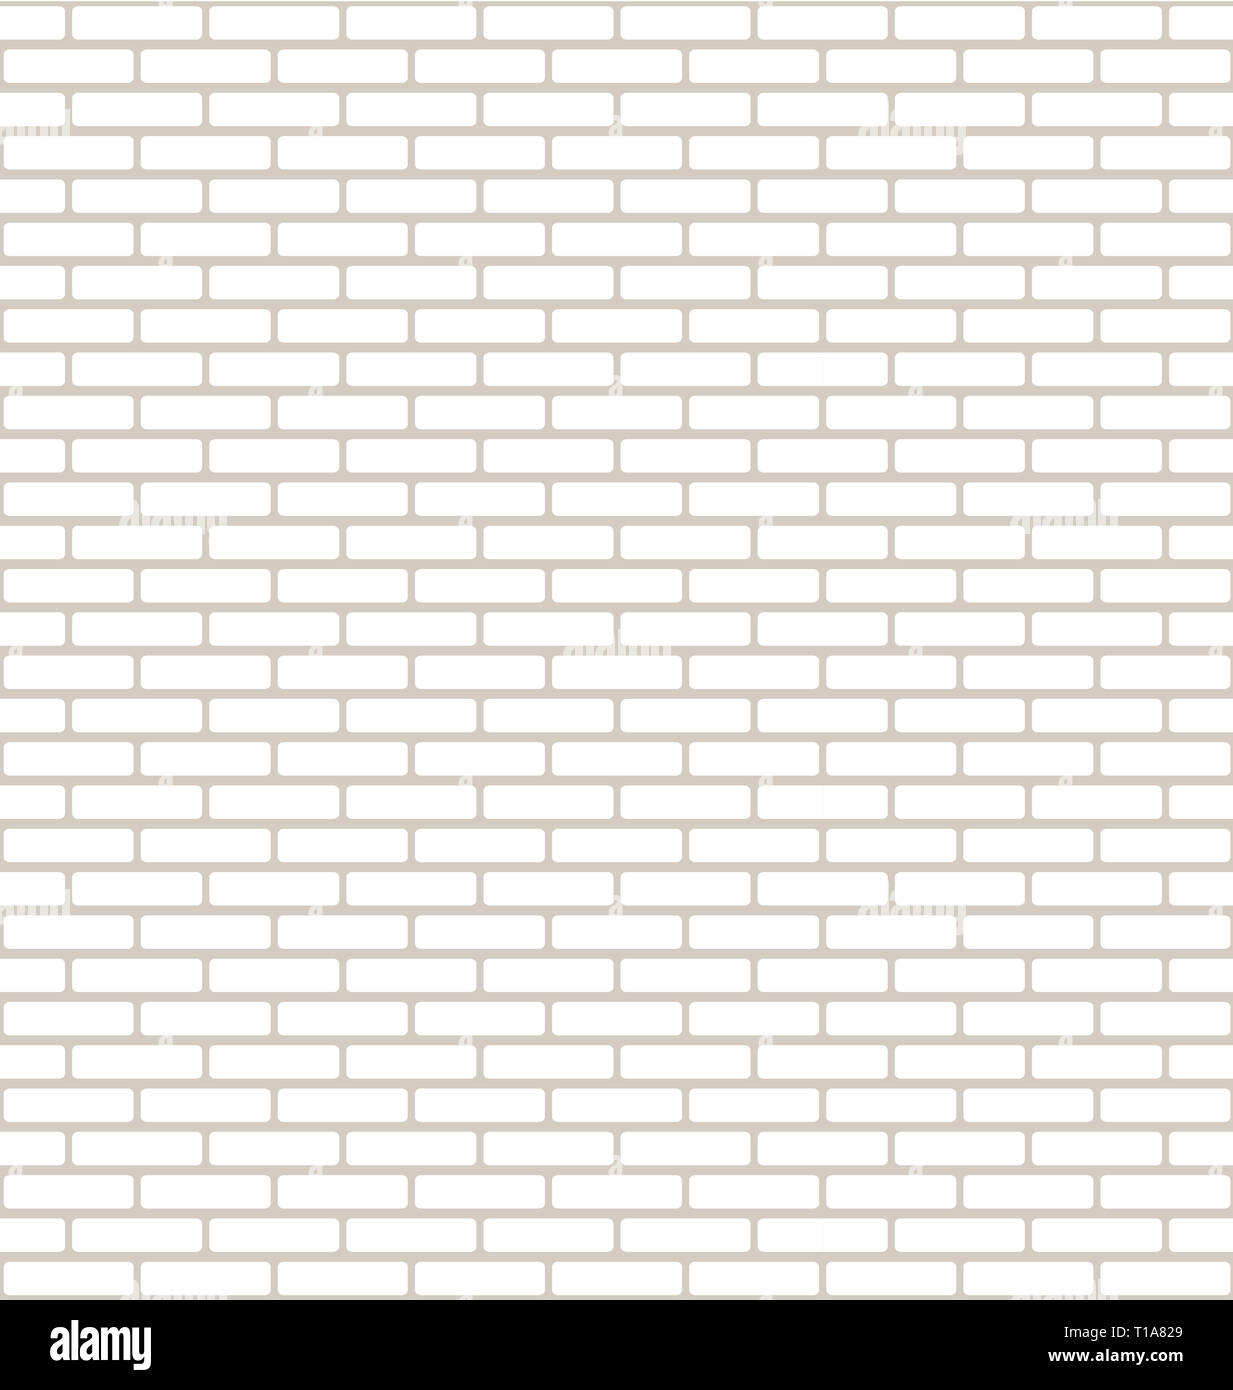 Brick Wall Texture with Small Bricks in White and Light Brown Stock Photo